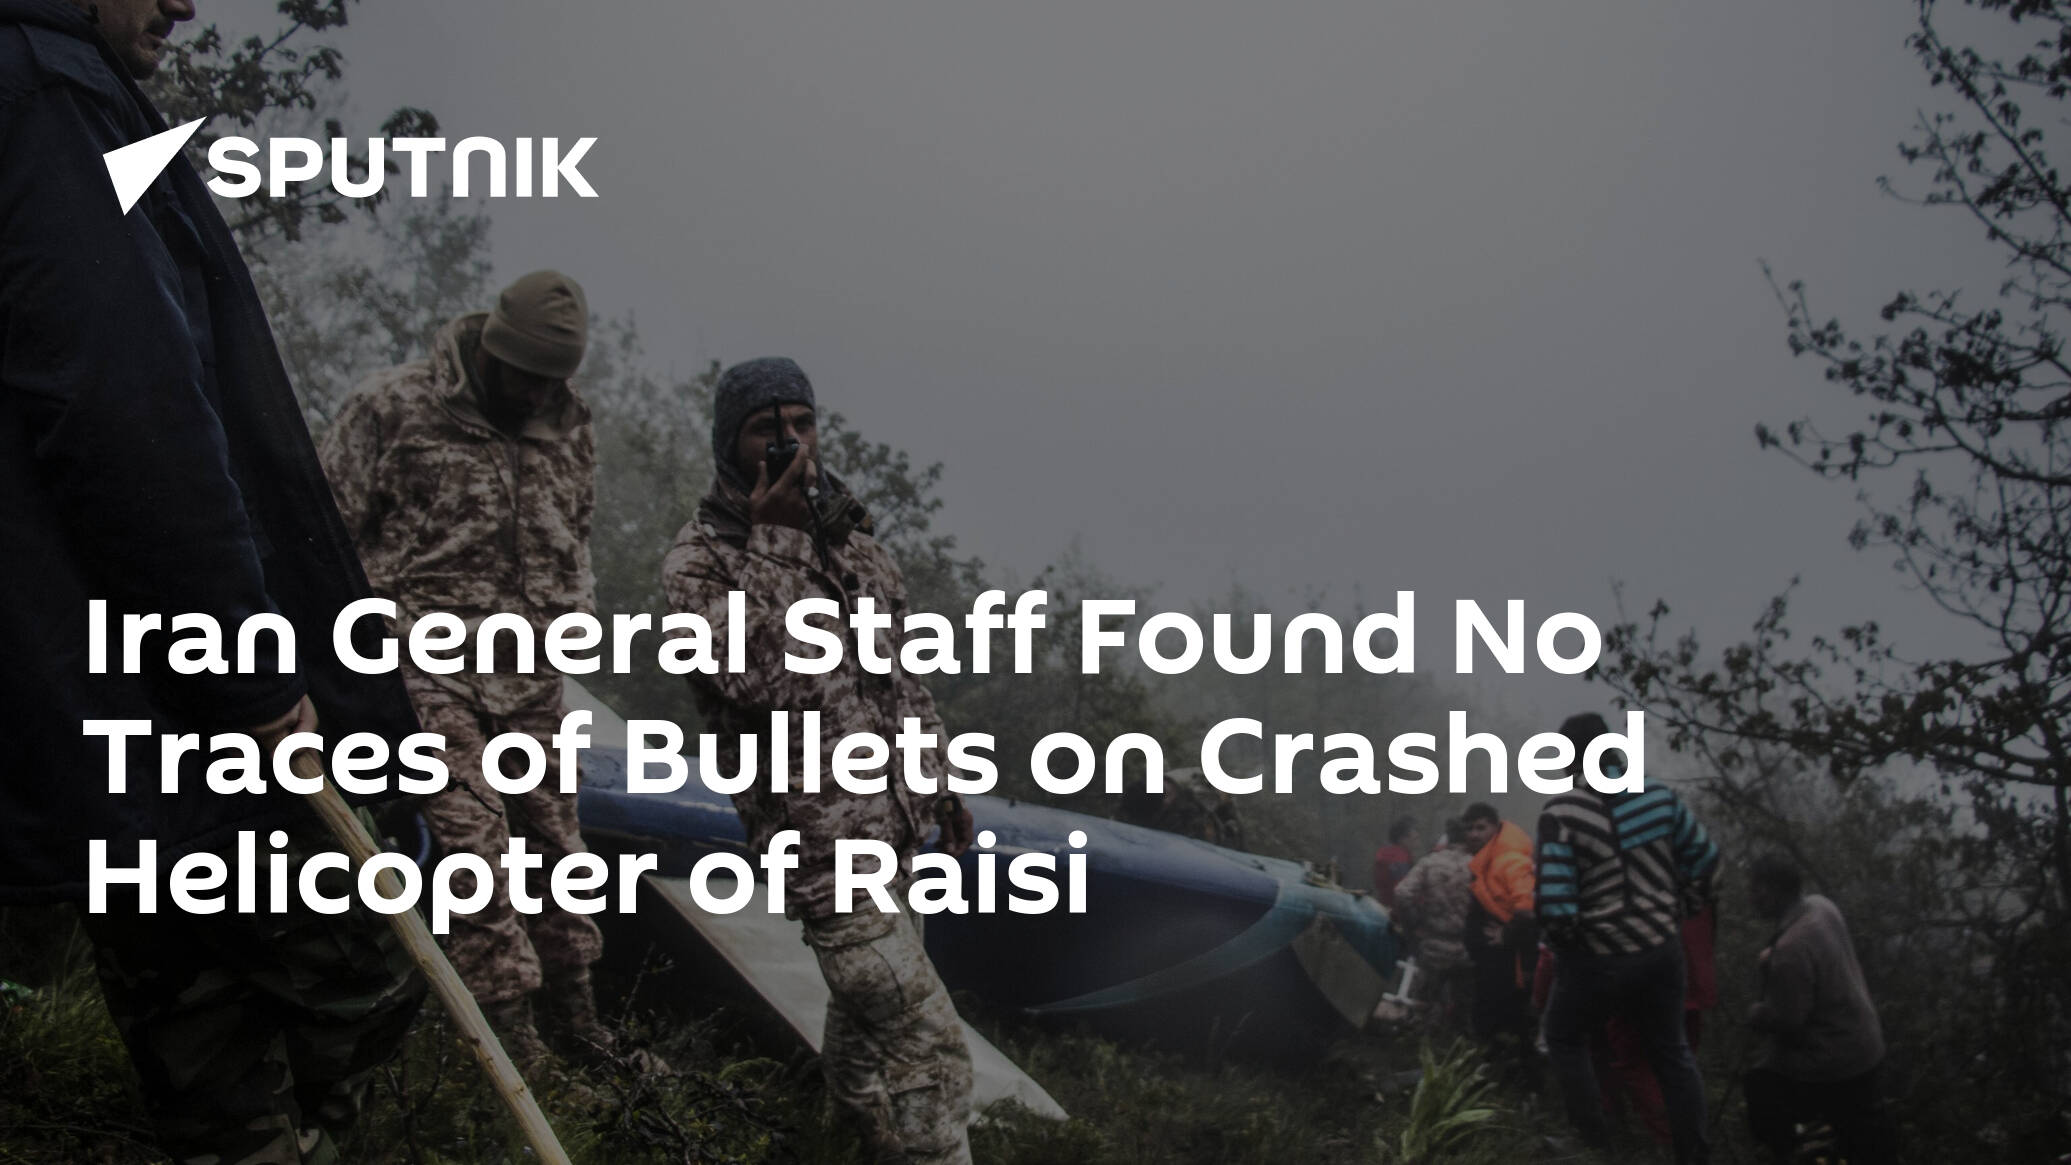 Iran General Staff Found No Traces of Bullets on Crashed